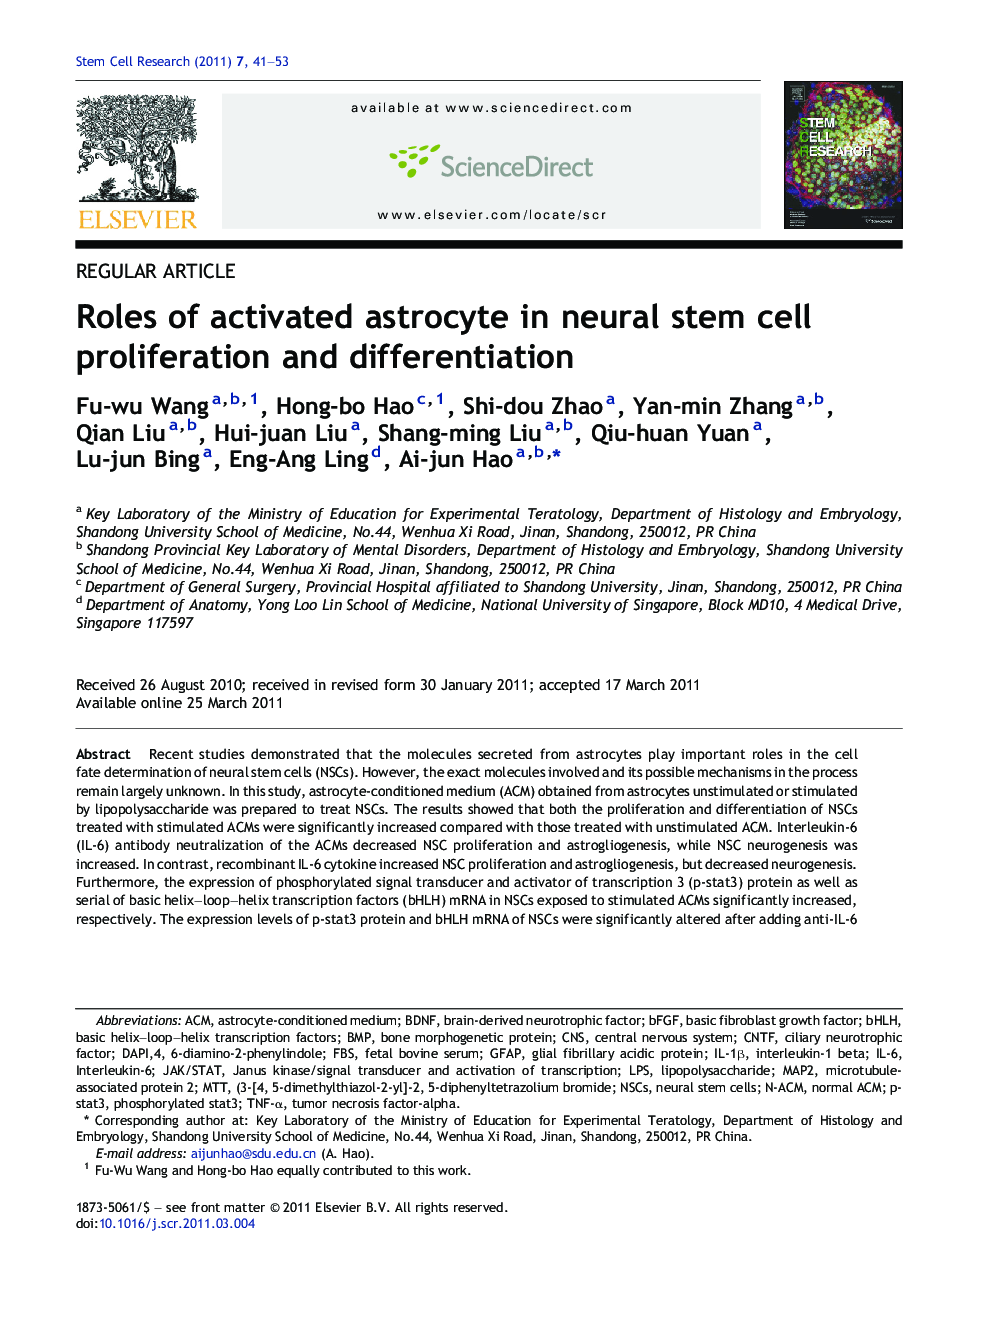 Roles of activated astrocyte in neural stem cell proliferation and differentiation